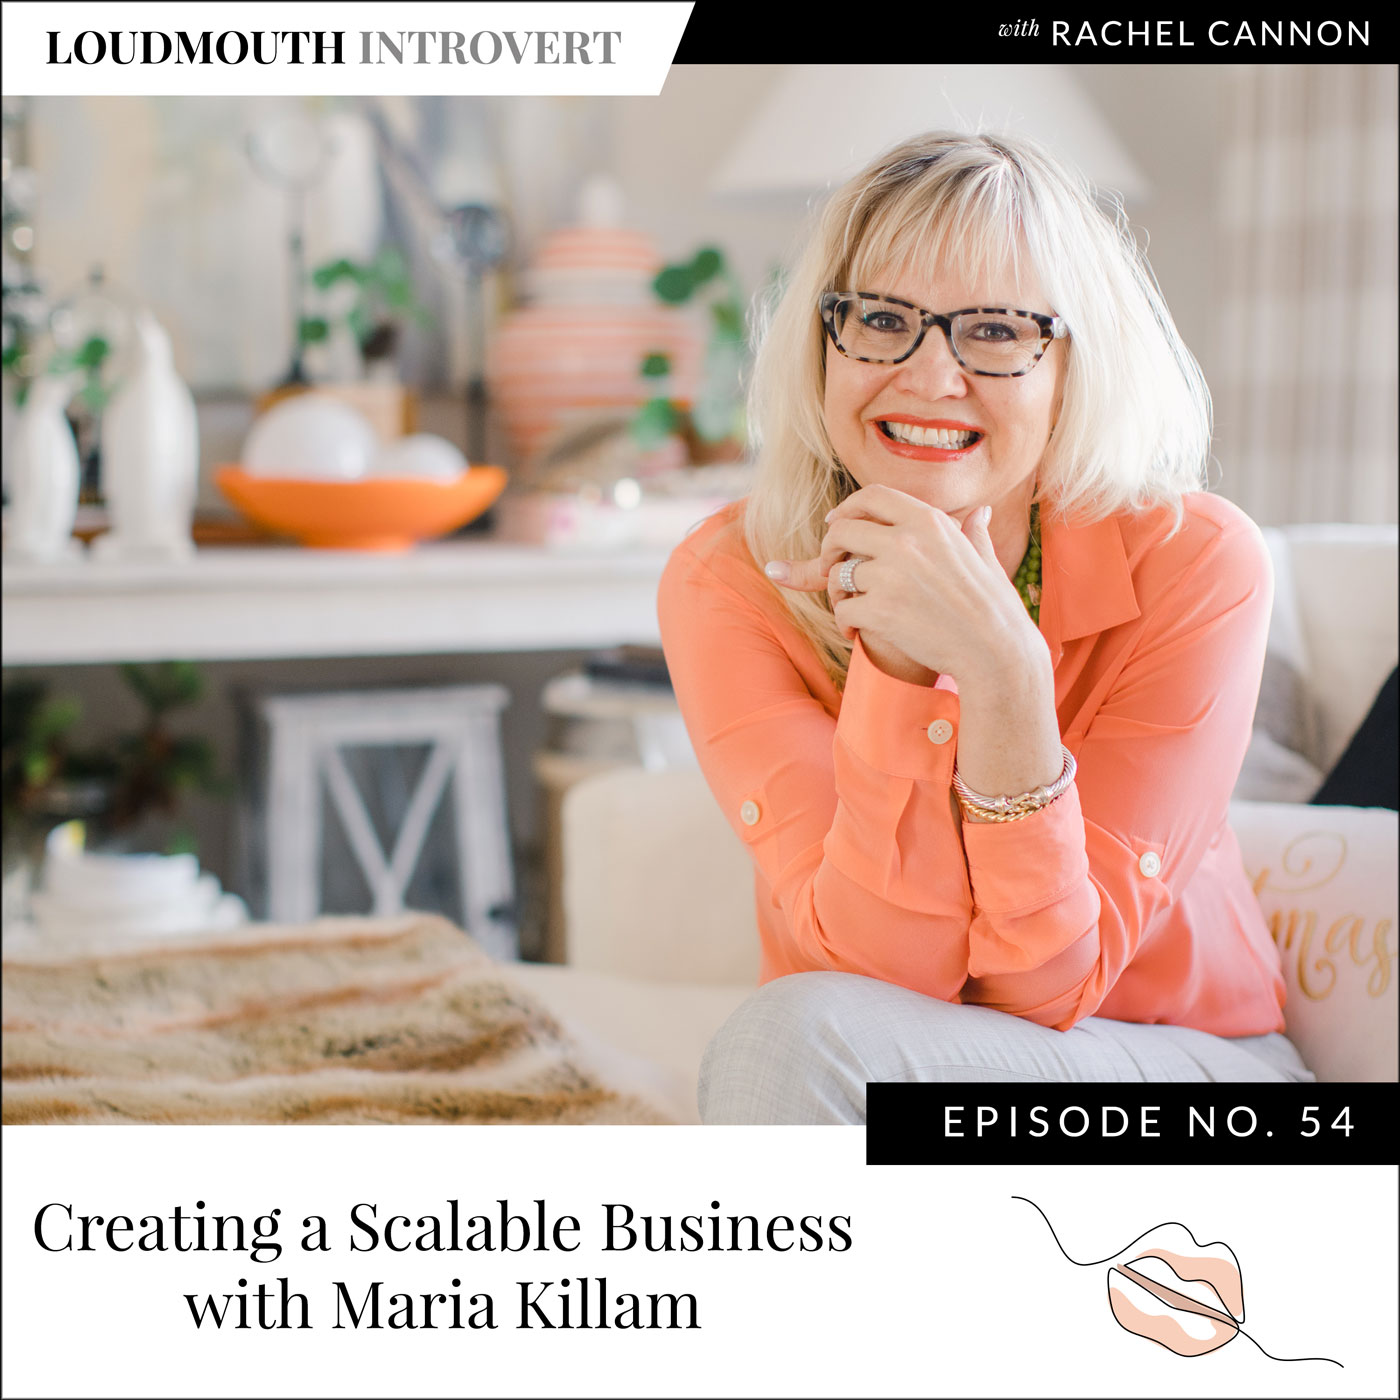 Creating a Scalable Business with Maria Killam